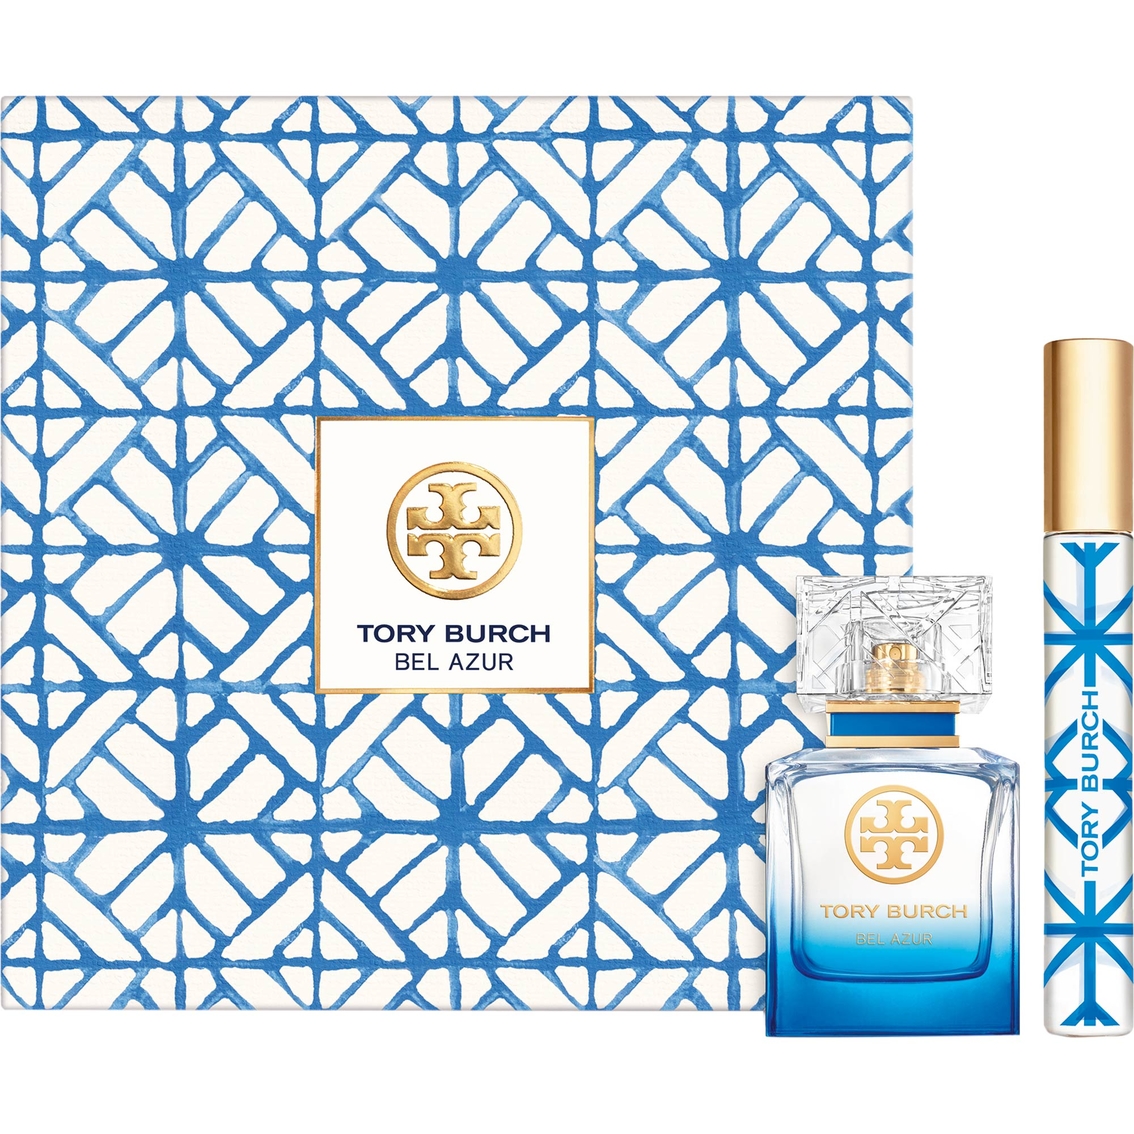 Tory Burch Bel Azur 2 Pc. Gift Set | Gifts Sets For Her | Beauty & Health |  Shop The Exchange